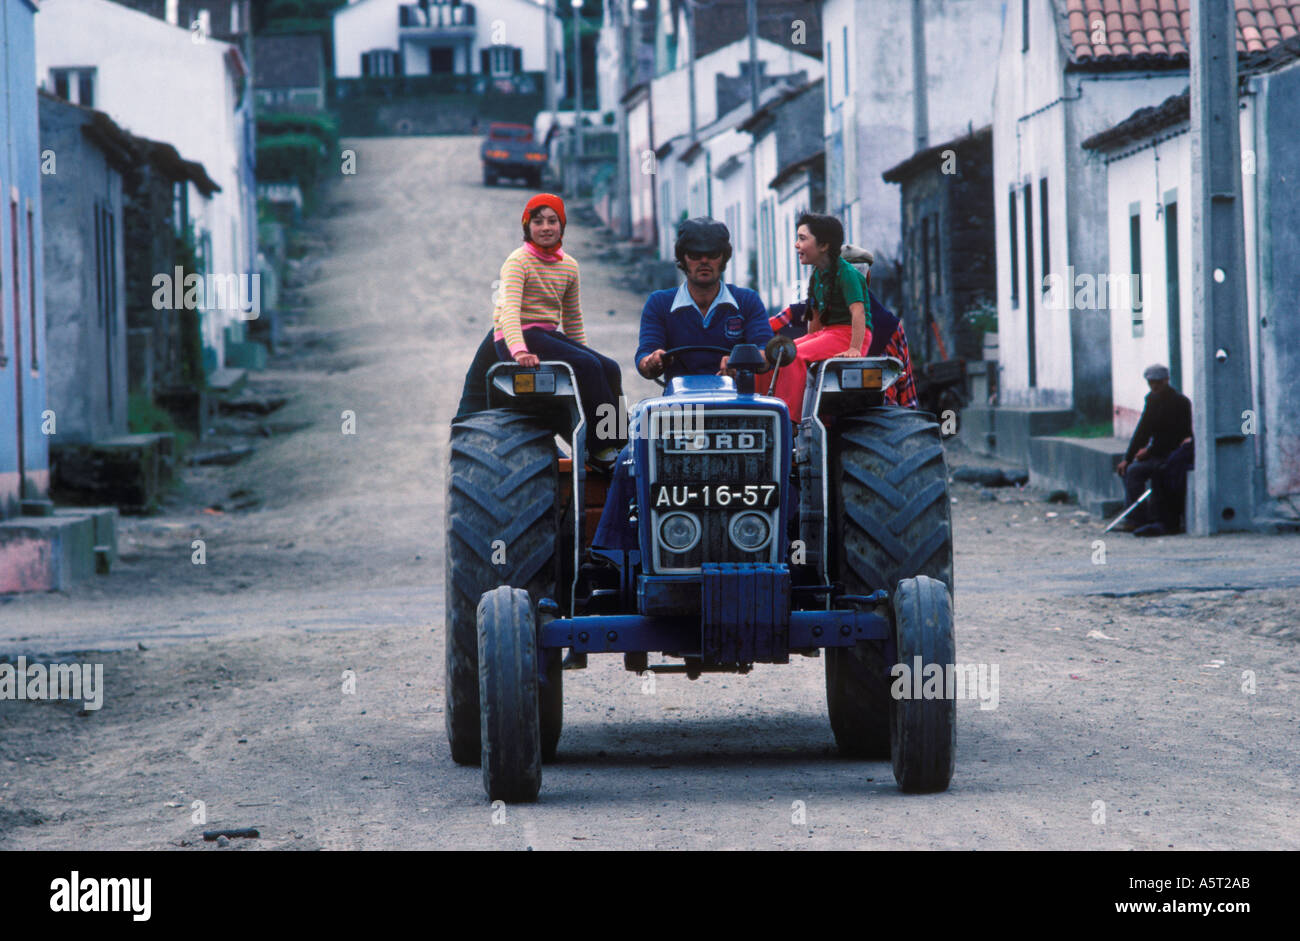 Azores Sao Miguel Island Portugal Tractor driver and children daily life  1980s HOMER SYKES Stock Photo